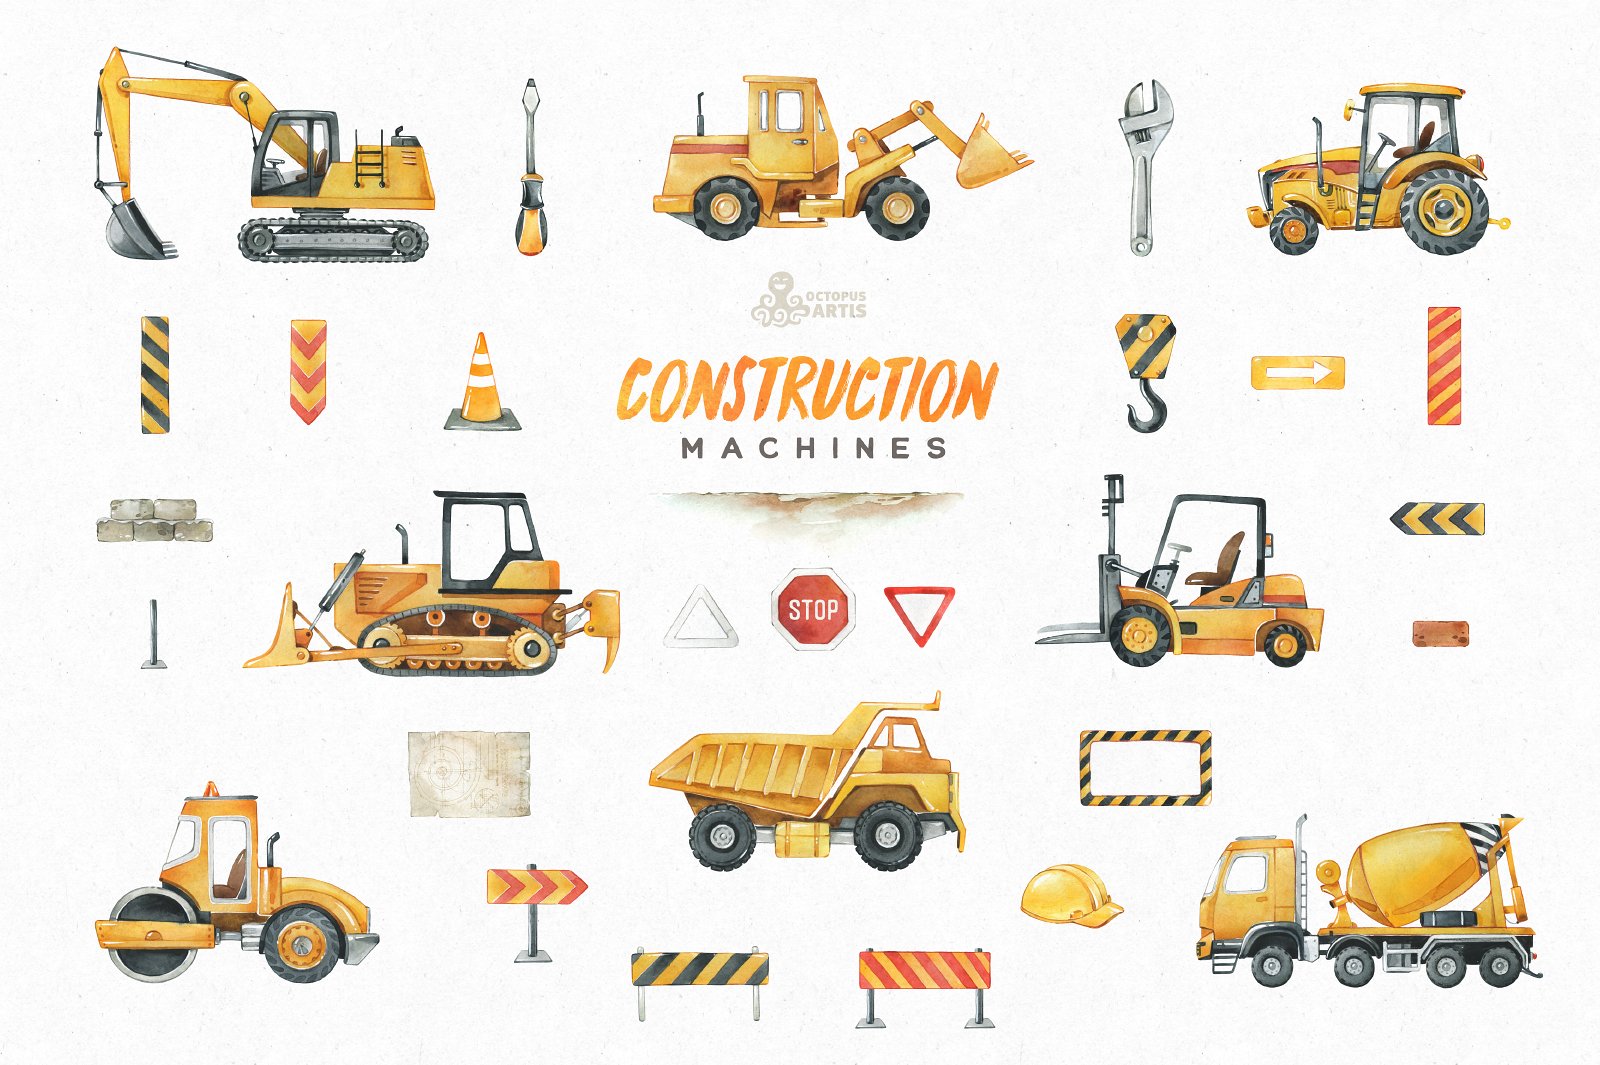 Construction Machines preview image.